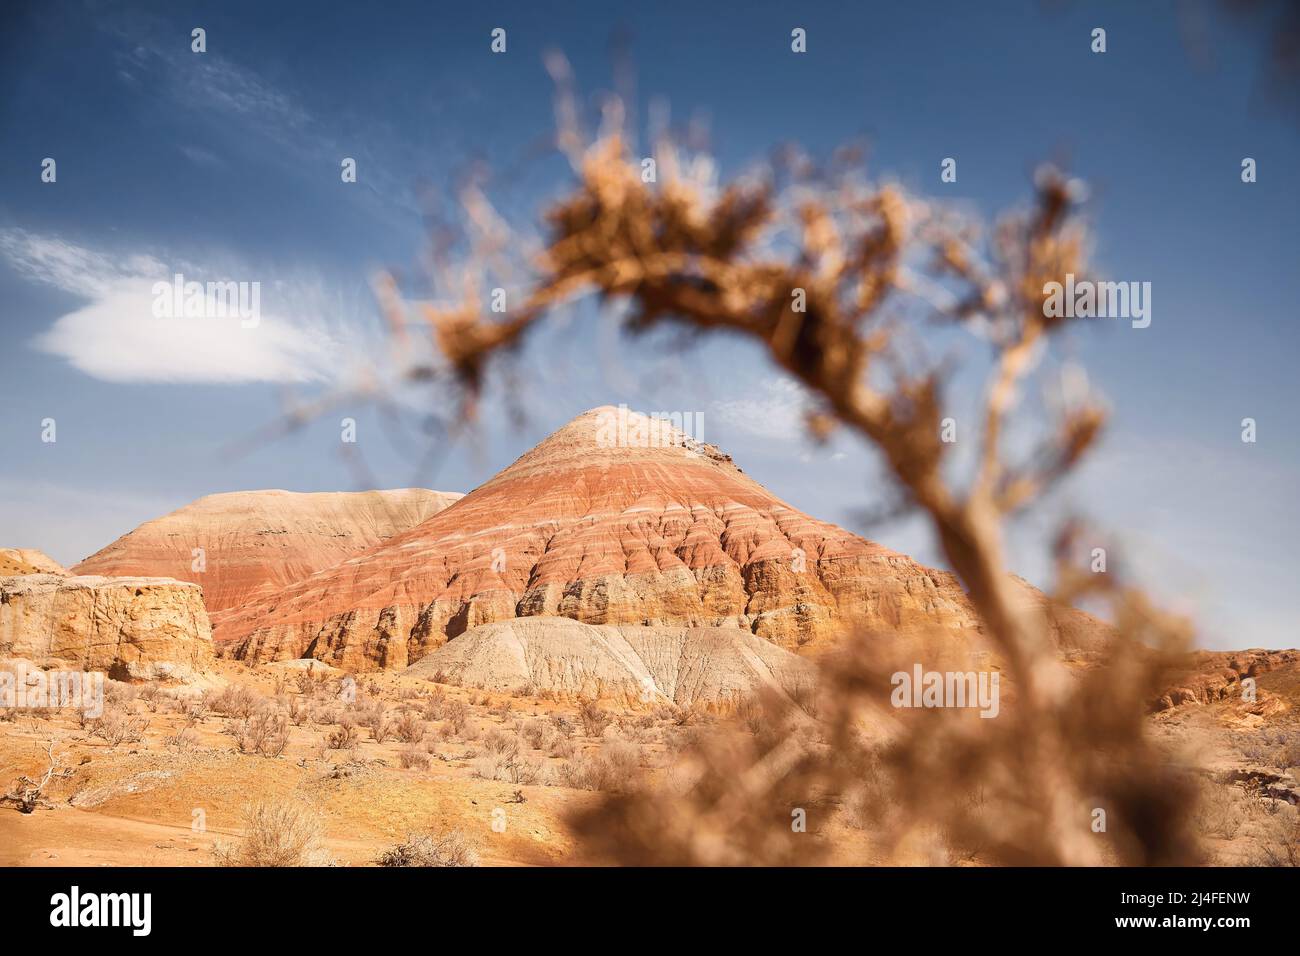 Landscape of Red with stripe bizarre layered mountains in canyon in beautiful desert park with dry plant at foreground Stock Photo